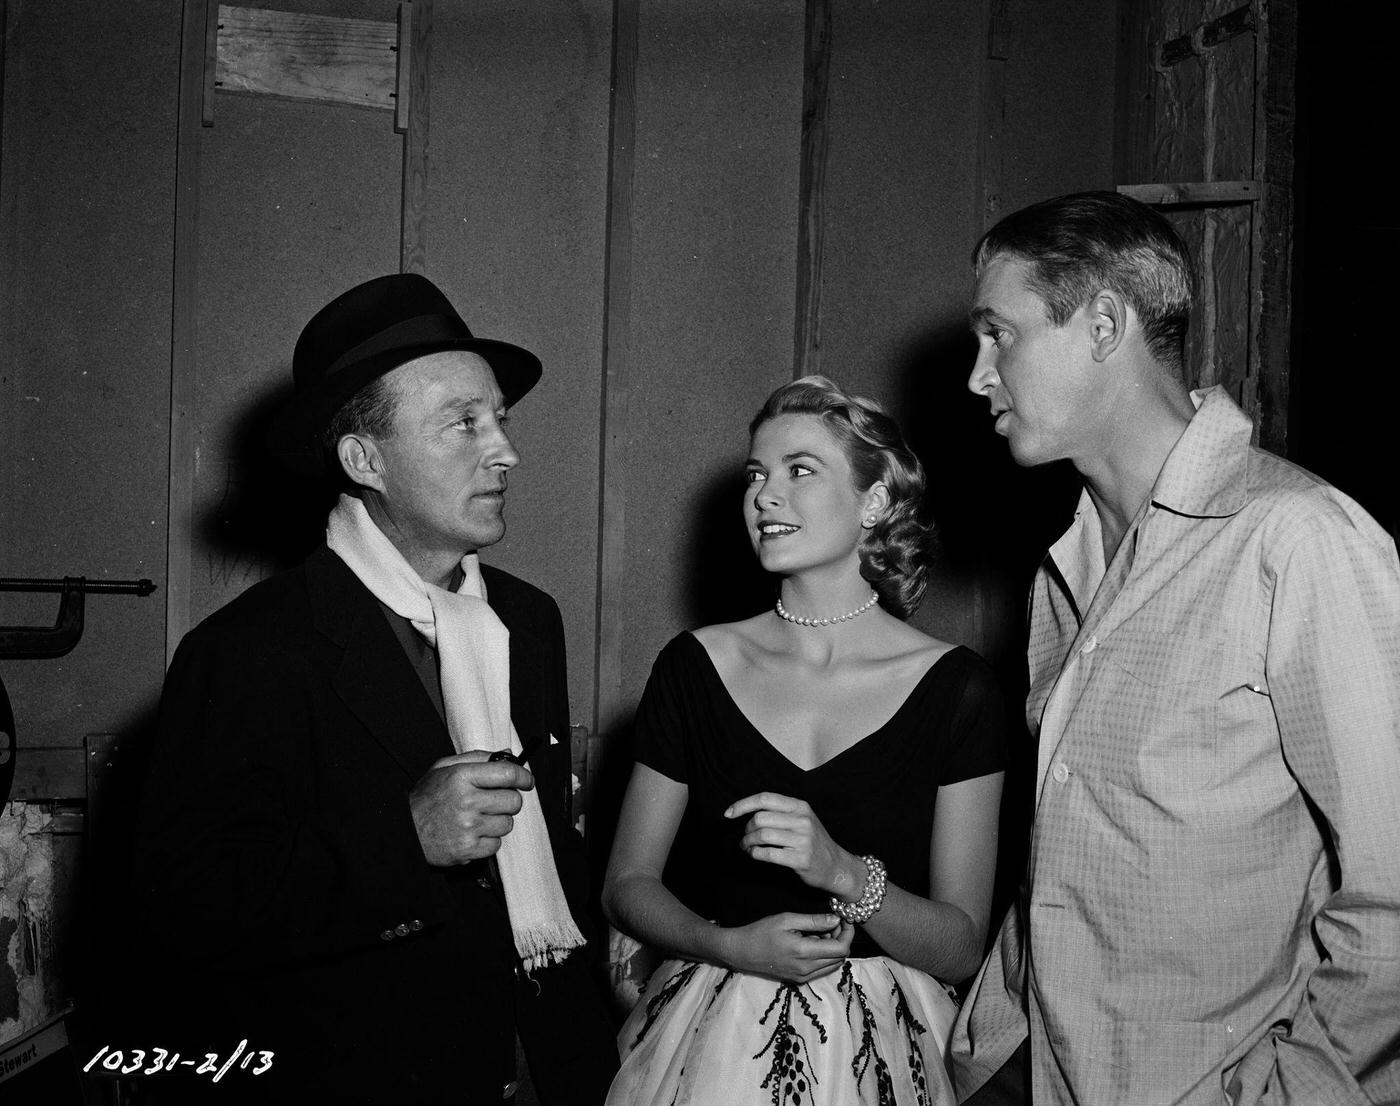 Bing Crosby visiting actors Grace Kelly and James Stewart on the set of their film 'Rear Window', 1954.